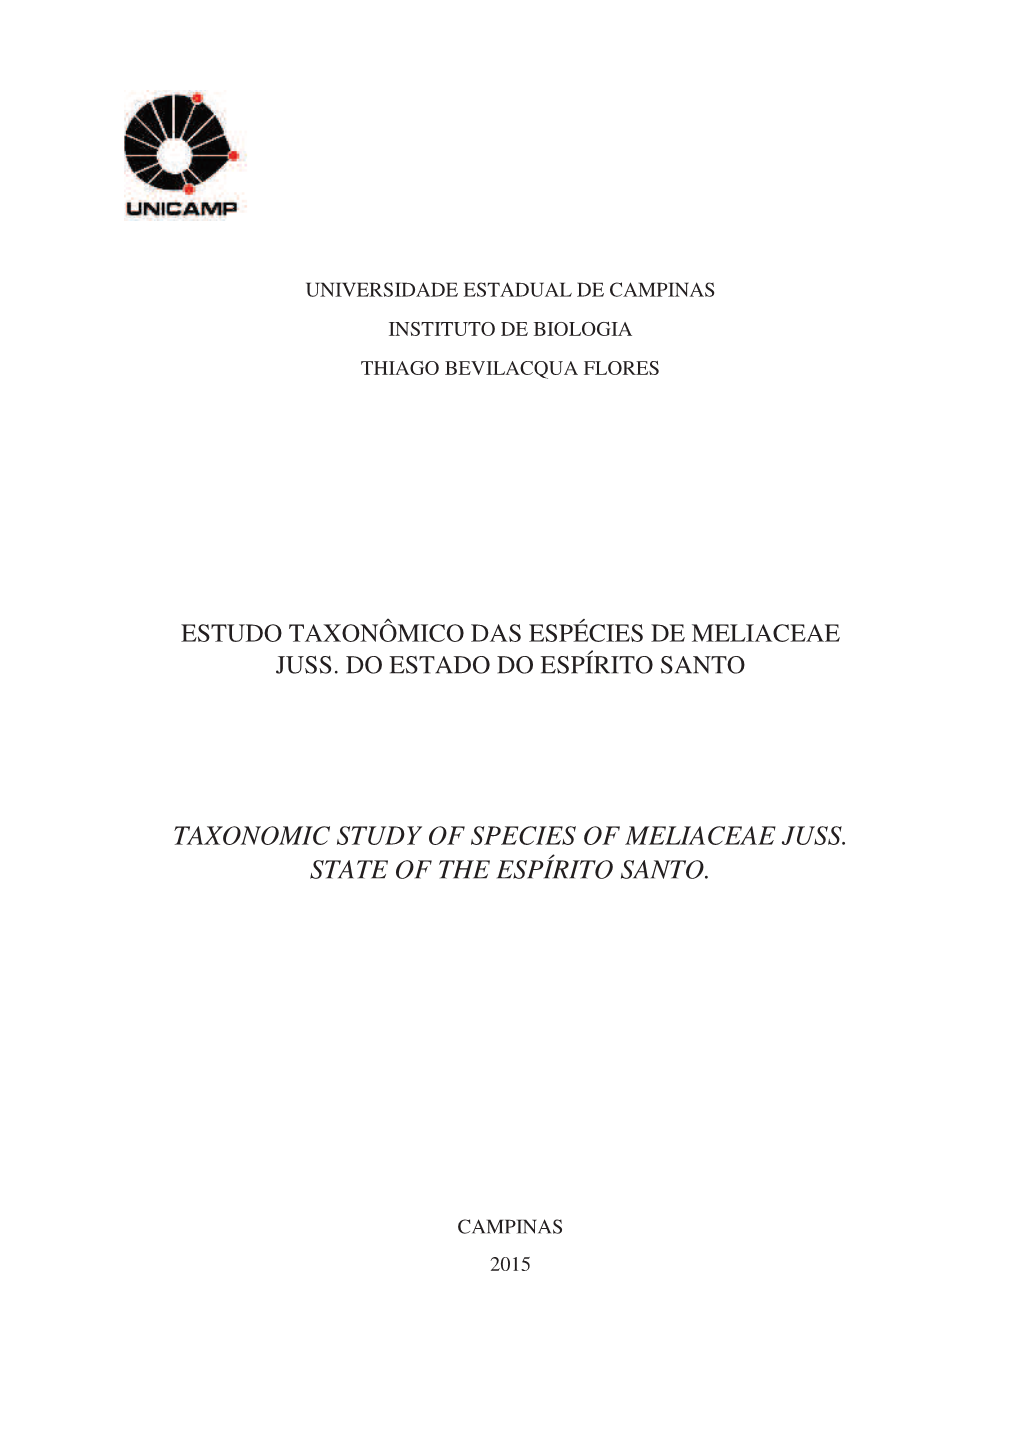 Taxonomic Study of Species of Meliaceae Juss. State of the Espírito Santo